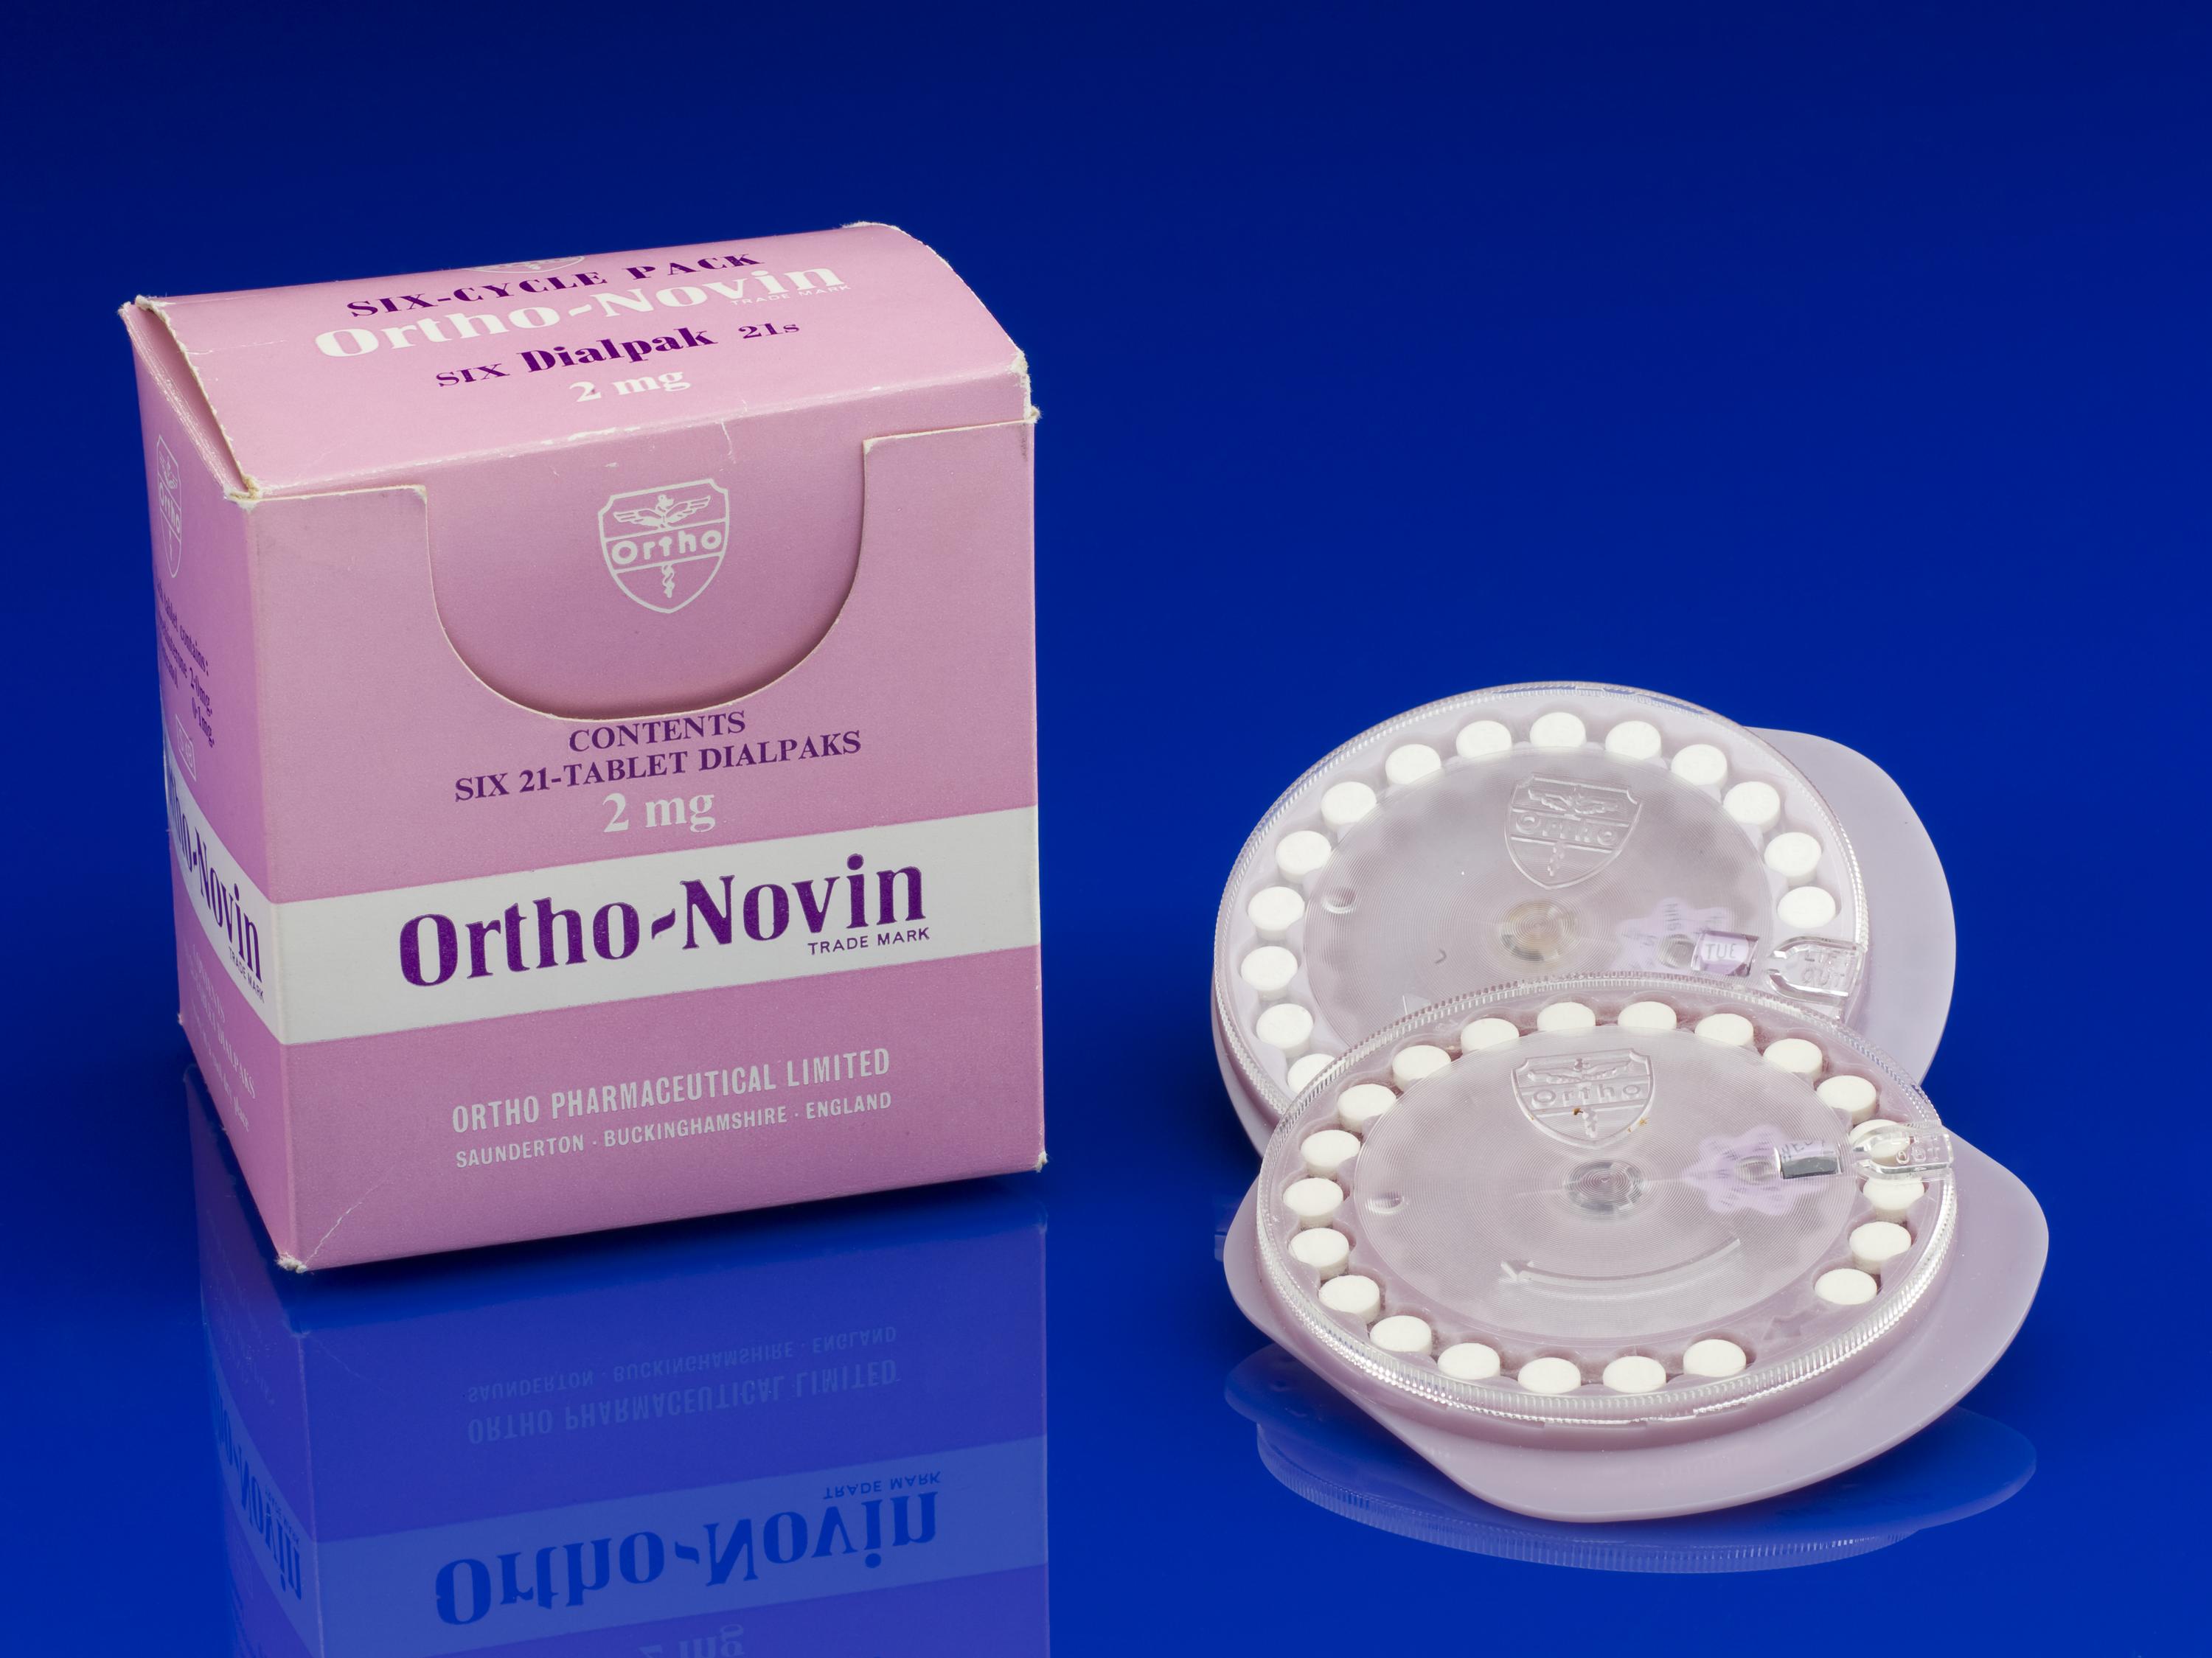 Combined monophasic contraceptive pills, "Ortho-Novin", 1960-1968